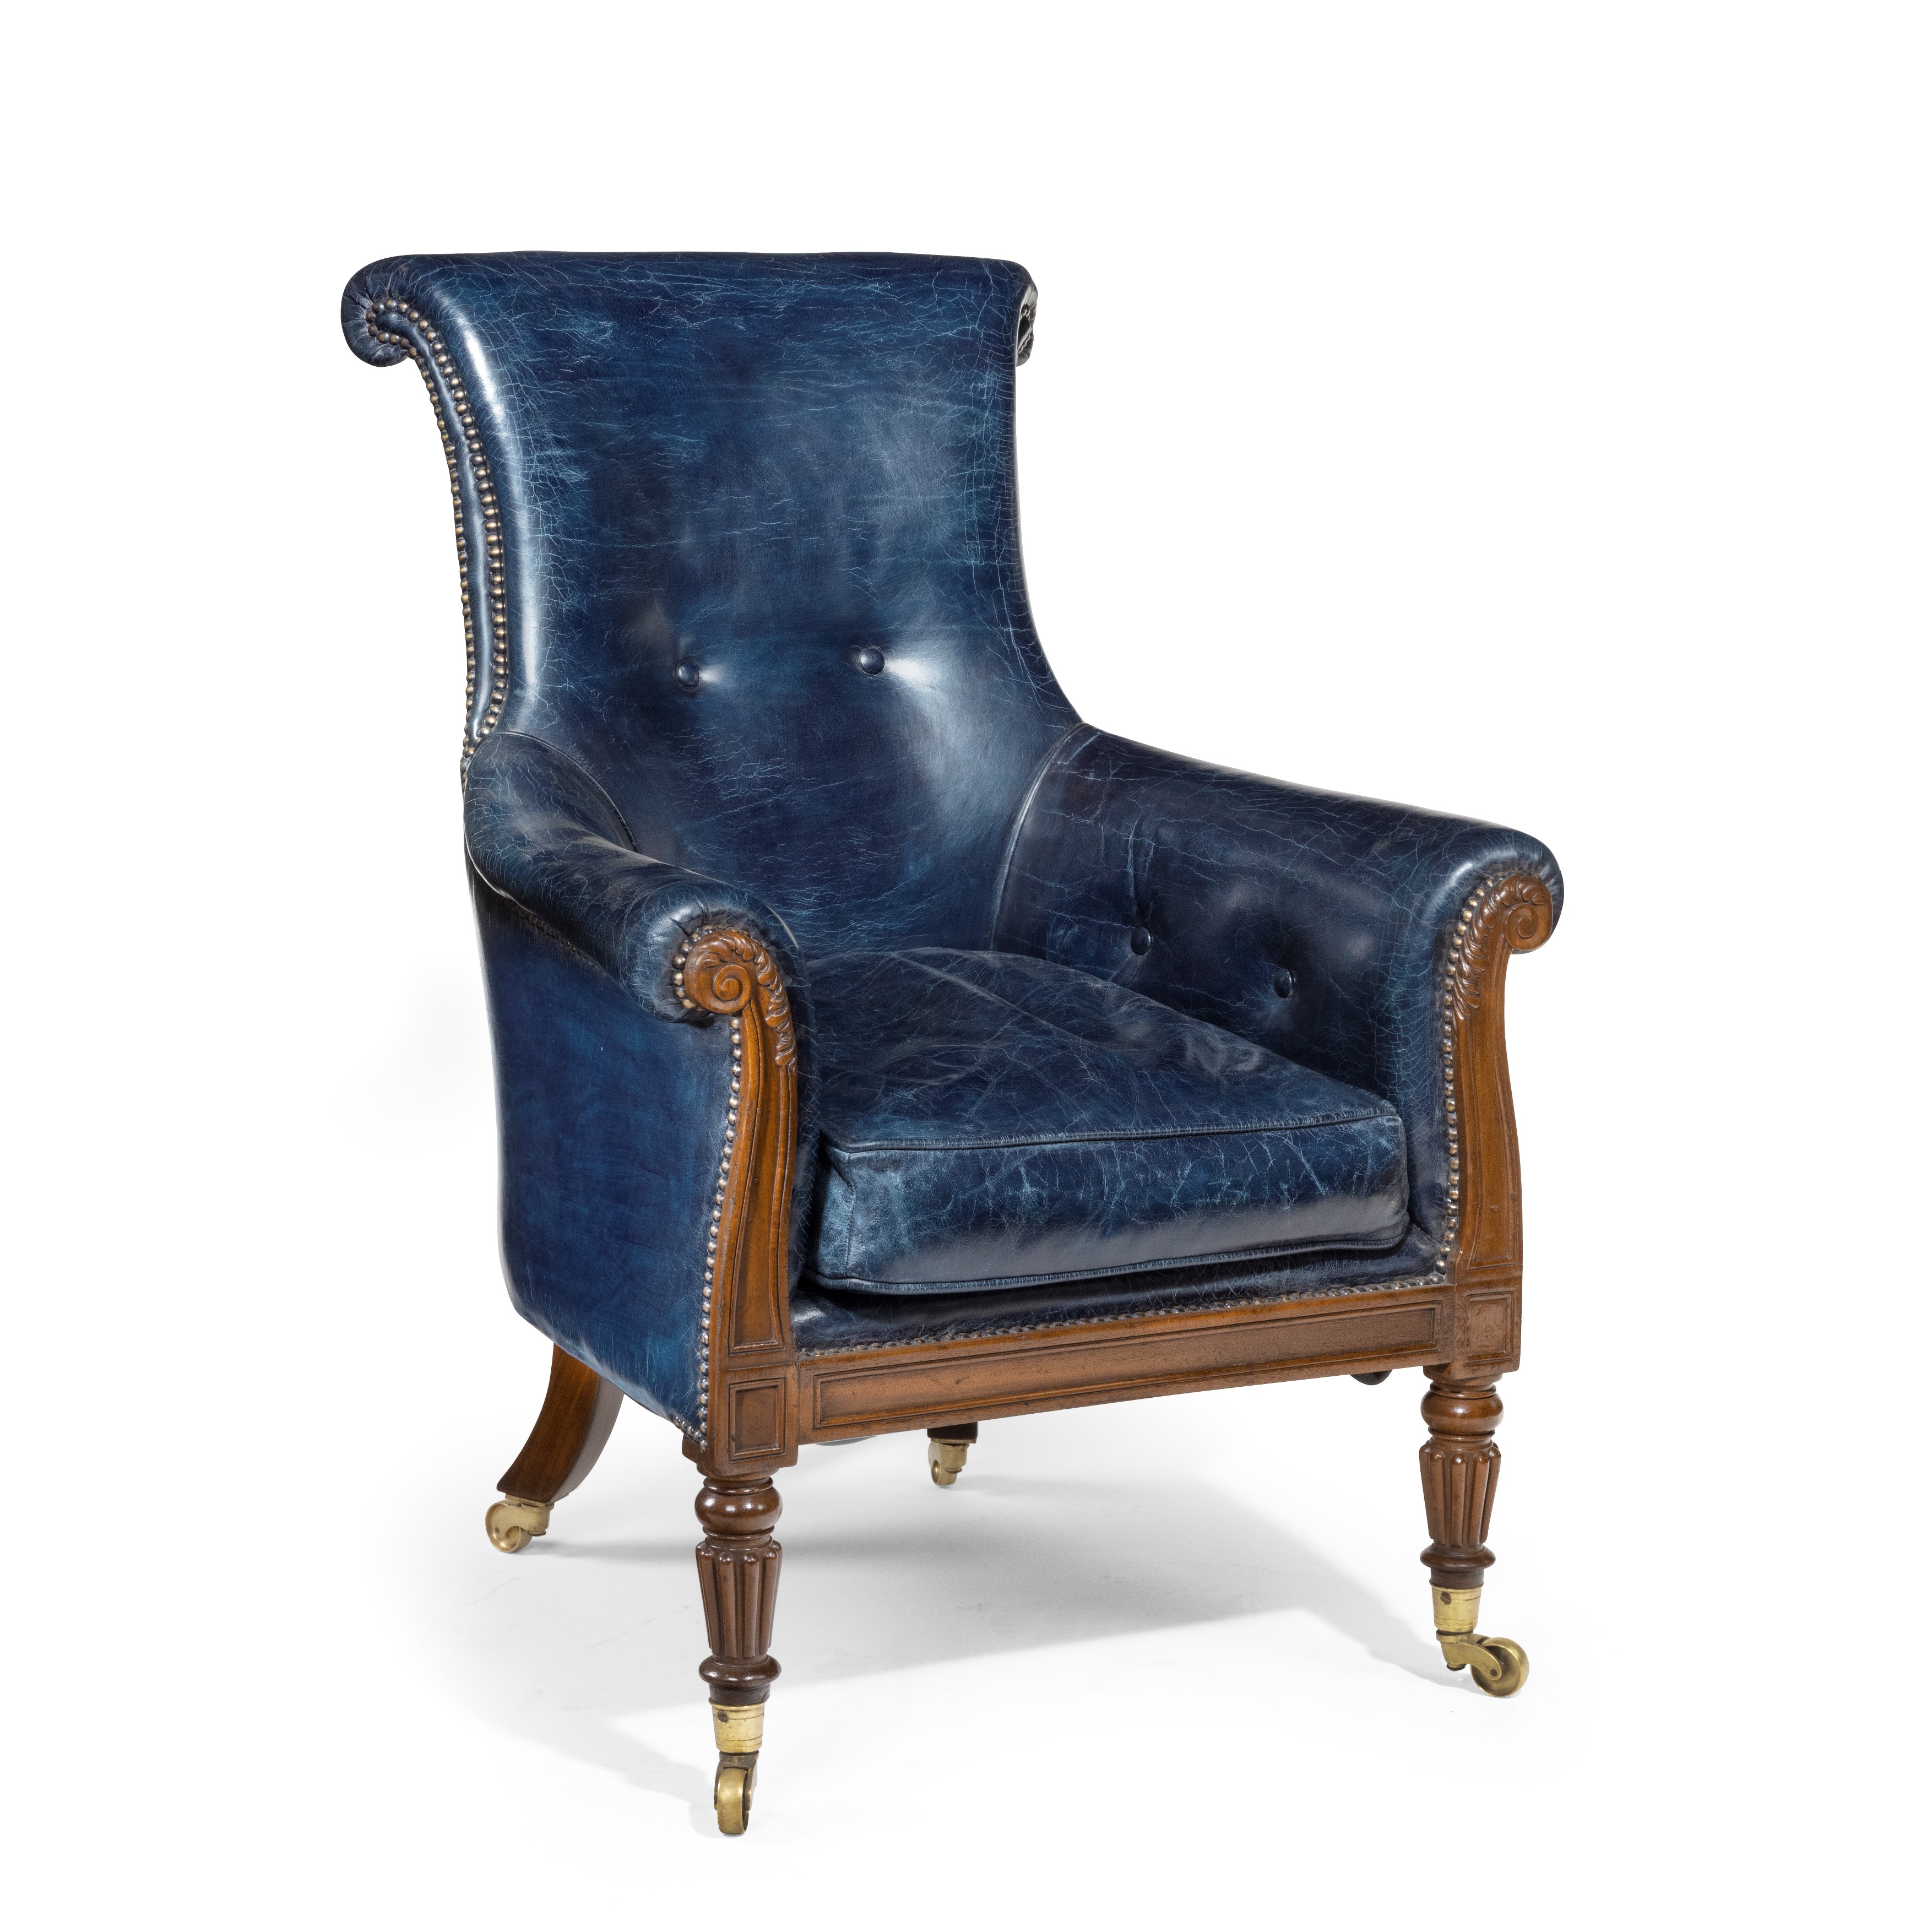 Regency Mahogany Library Chair by Gillows blue leather